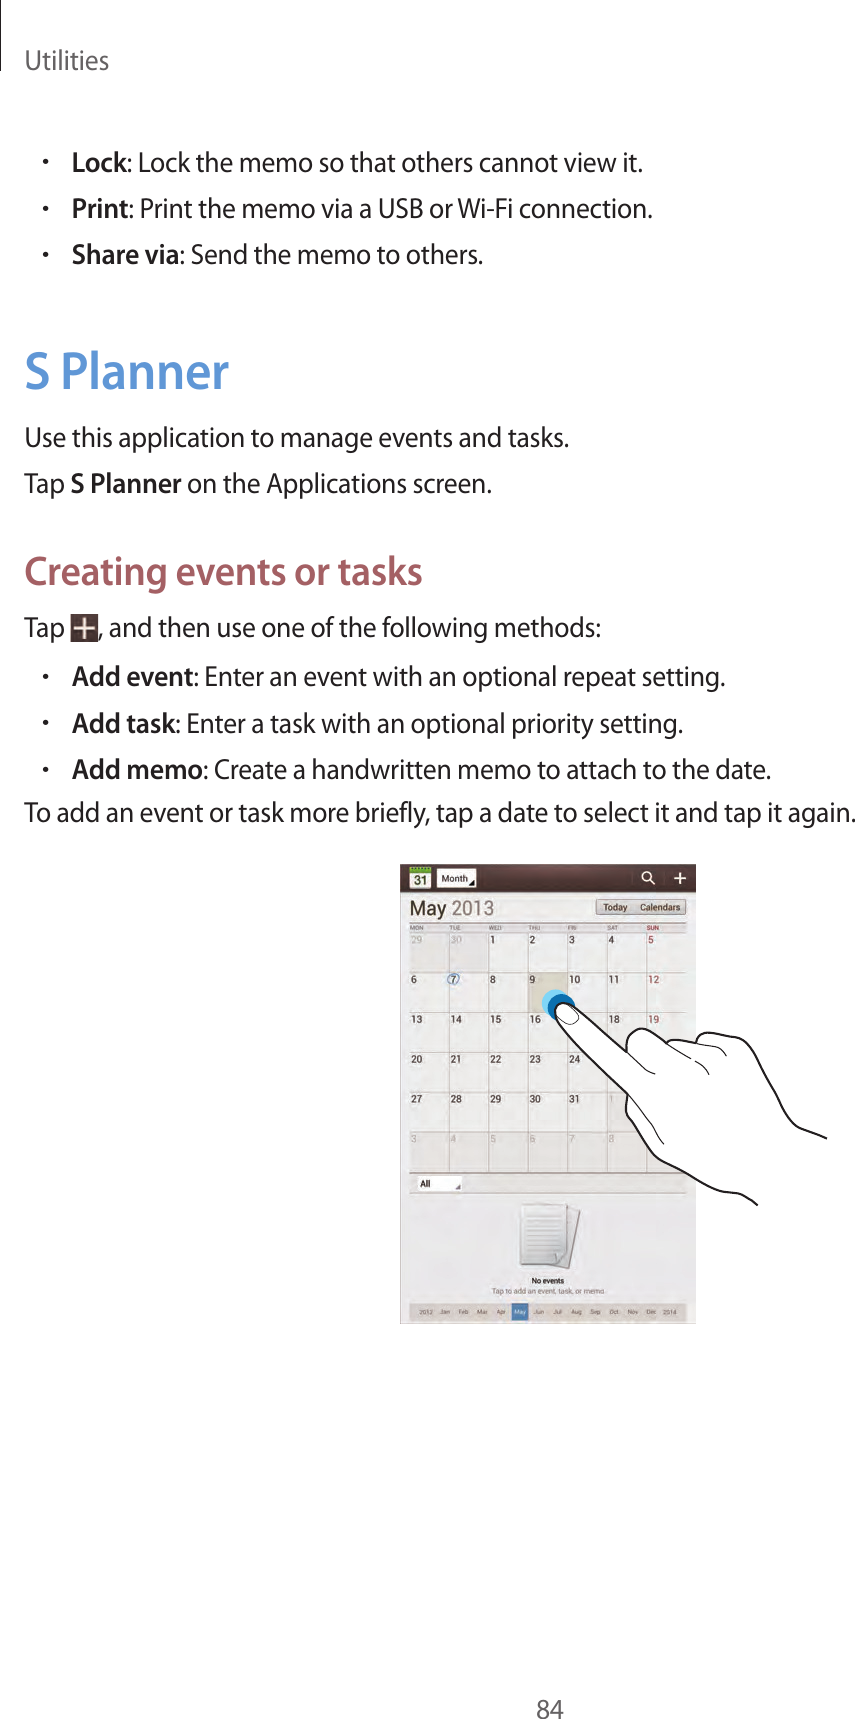 Utilities84•Lock: Lock the memo so that others cannot view it.•Print: Print the memo via a USB or Wi-Fi connection.•Share via: Send the memo to others.S PlannerUse this application to manage events and tasks.Tap S Planner on the Applications screen.Creating events or tasksTap  , and then use one of the following methods:•Add event: Enter an event with an optional repeat setting.•Add task: Enter a task with an optional priority setting.•Add memo: Create a handwritten memo to attach to the date.To add an event or task more briefly, tap a date to select it and tap it again.